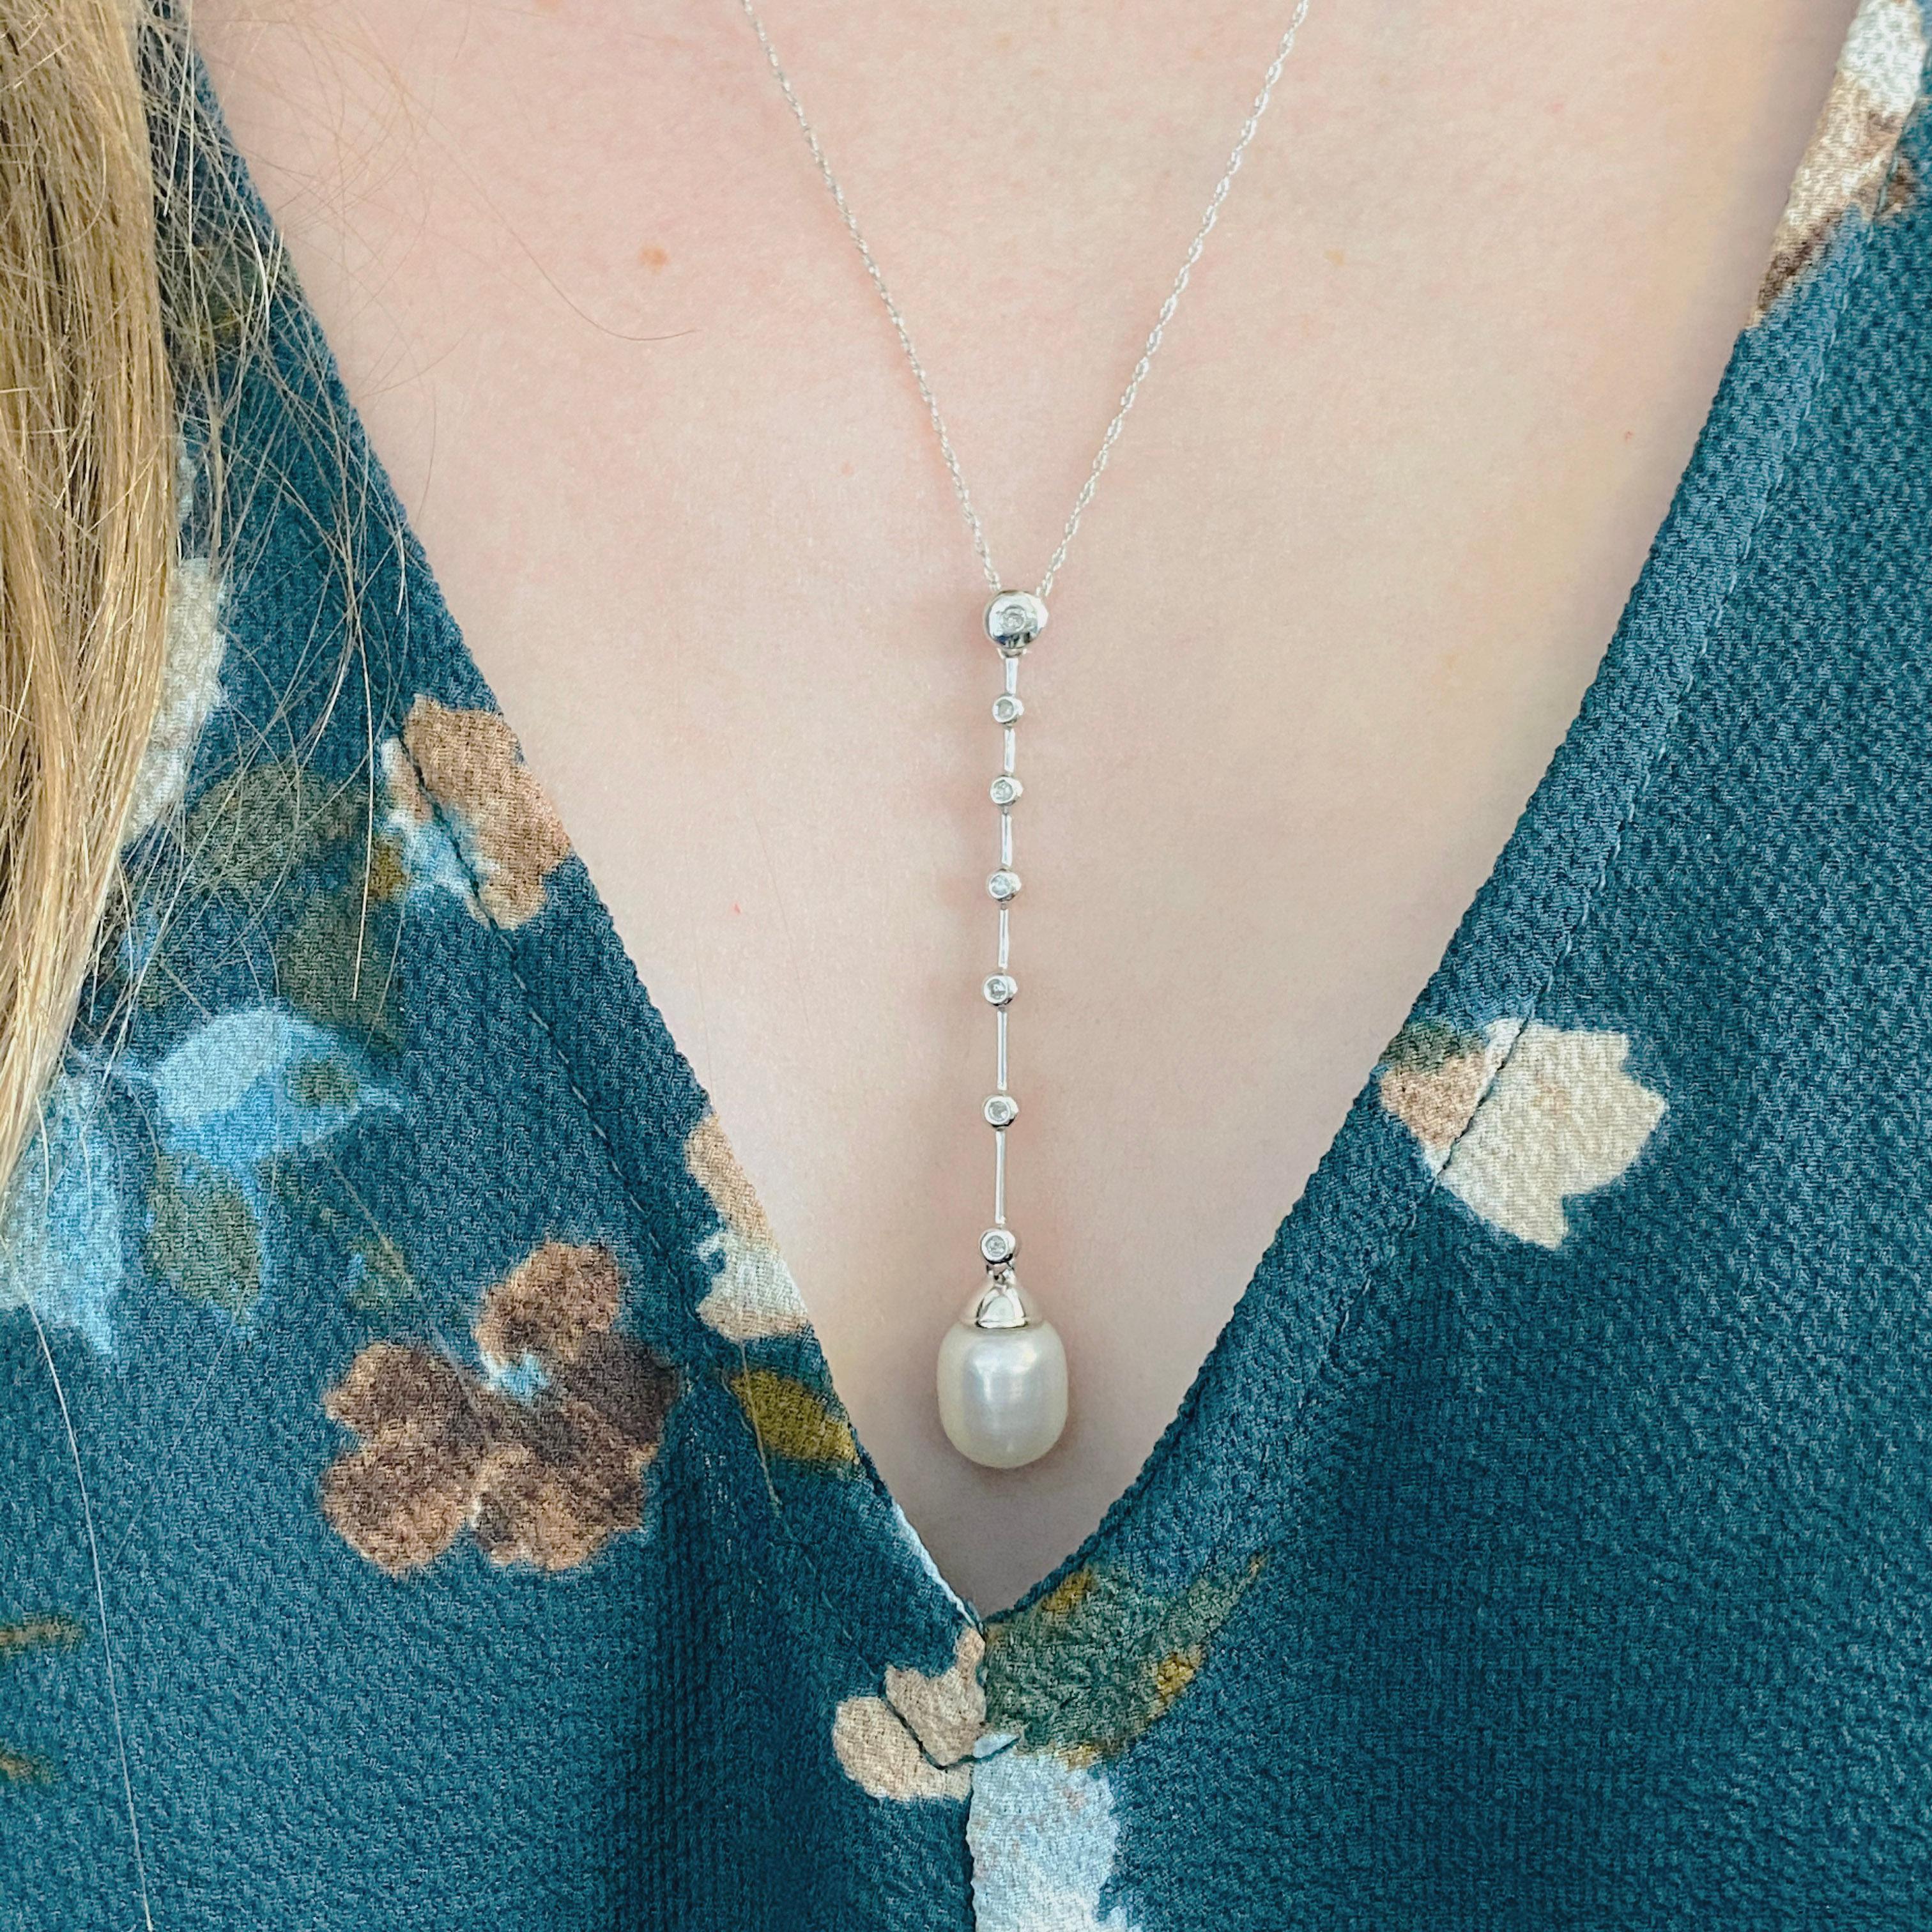 This stunningly vintage, beautiful genuine cultured pearl set in polished 14k white gold and dripping with diamonds provides a look that is very modern yet classic! This Circa 1970 necklace is very fashionable and can add a touch of style to any